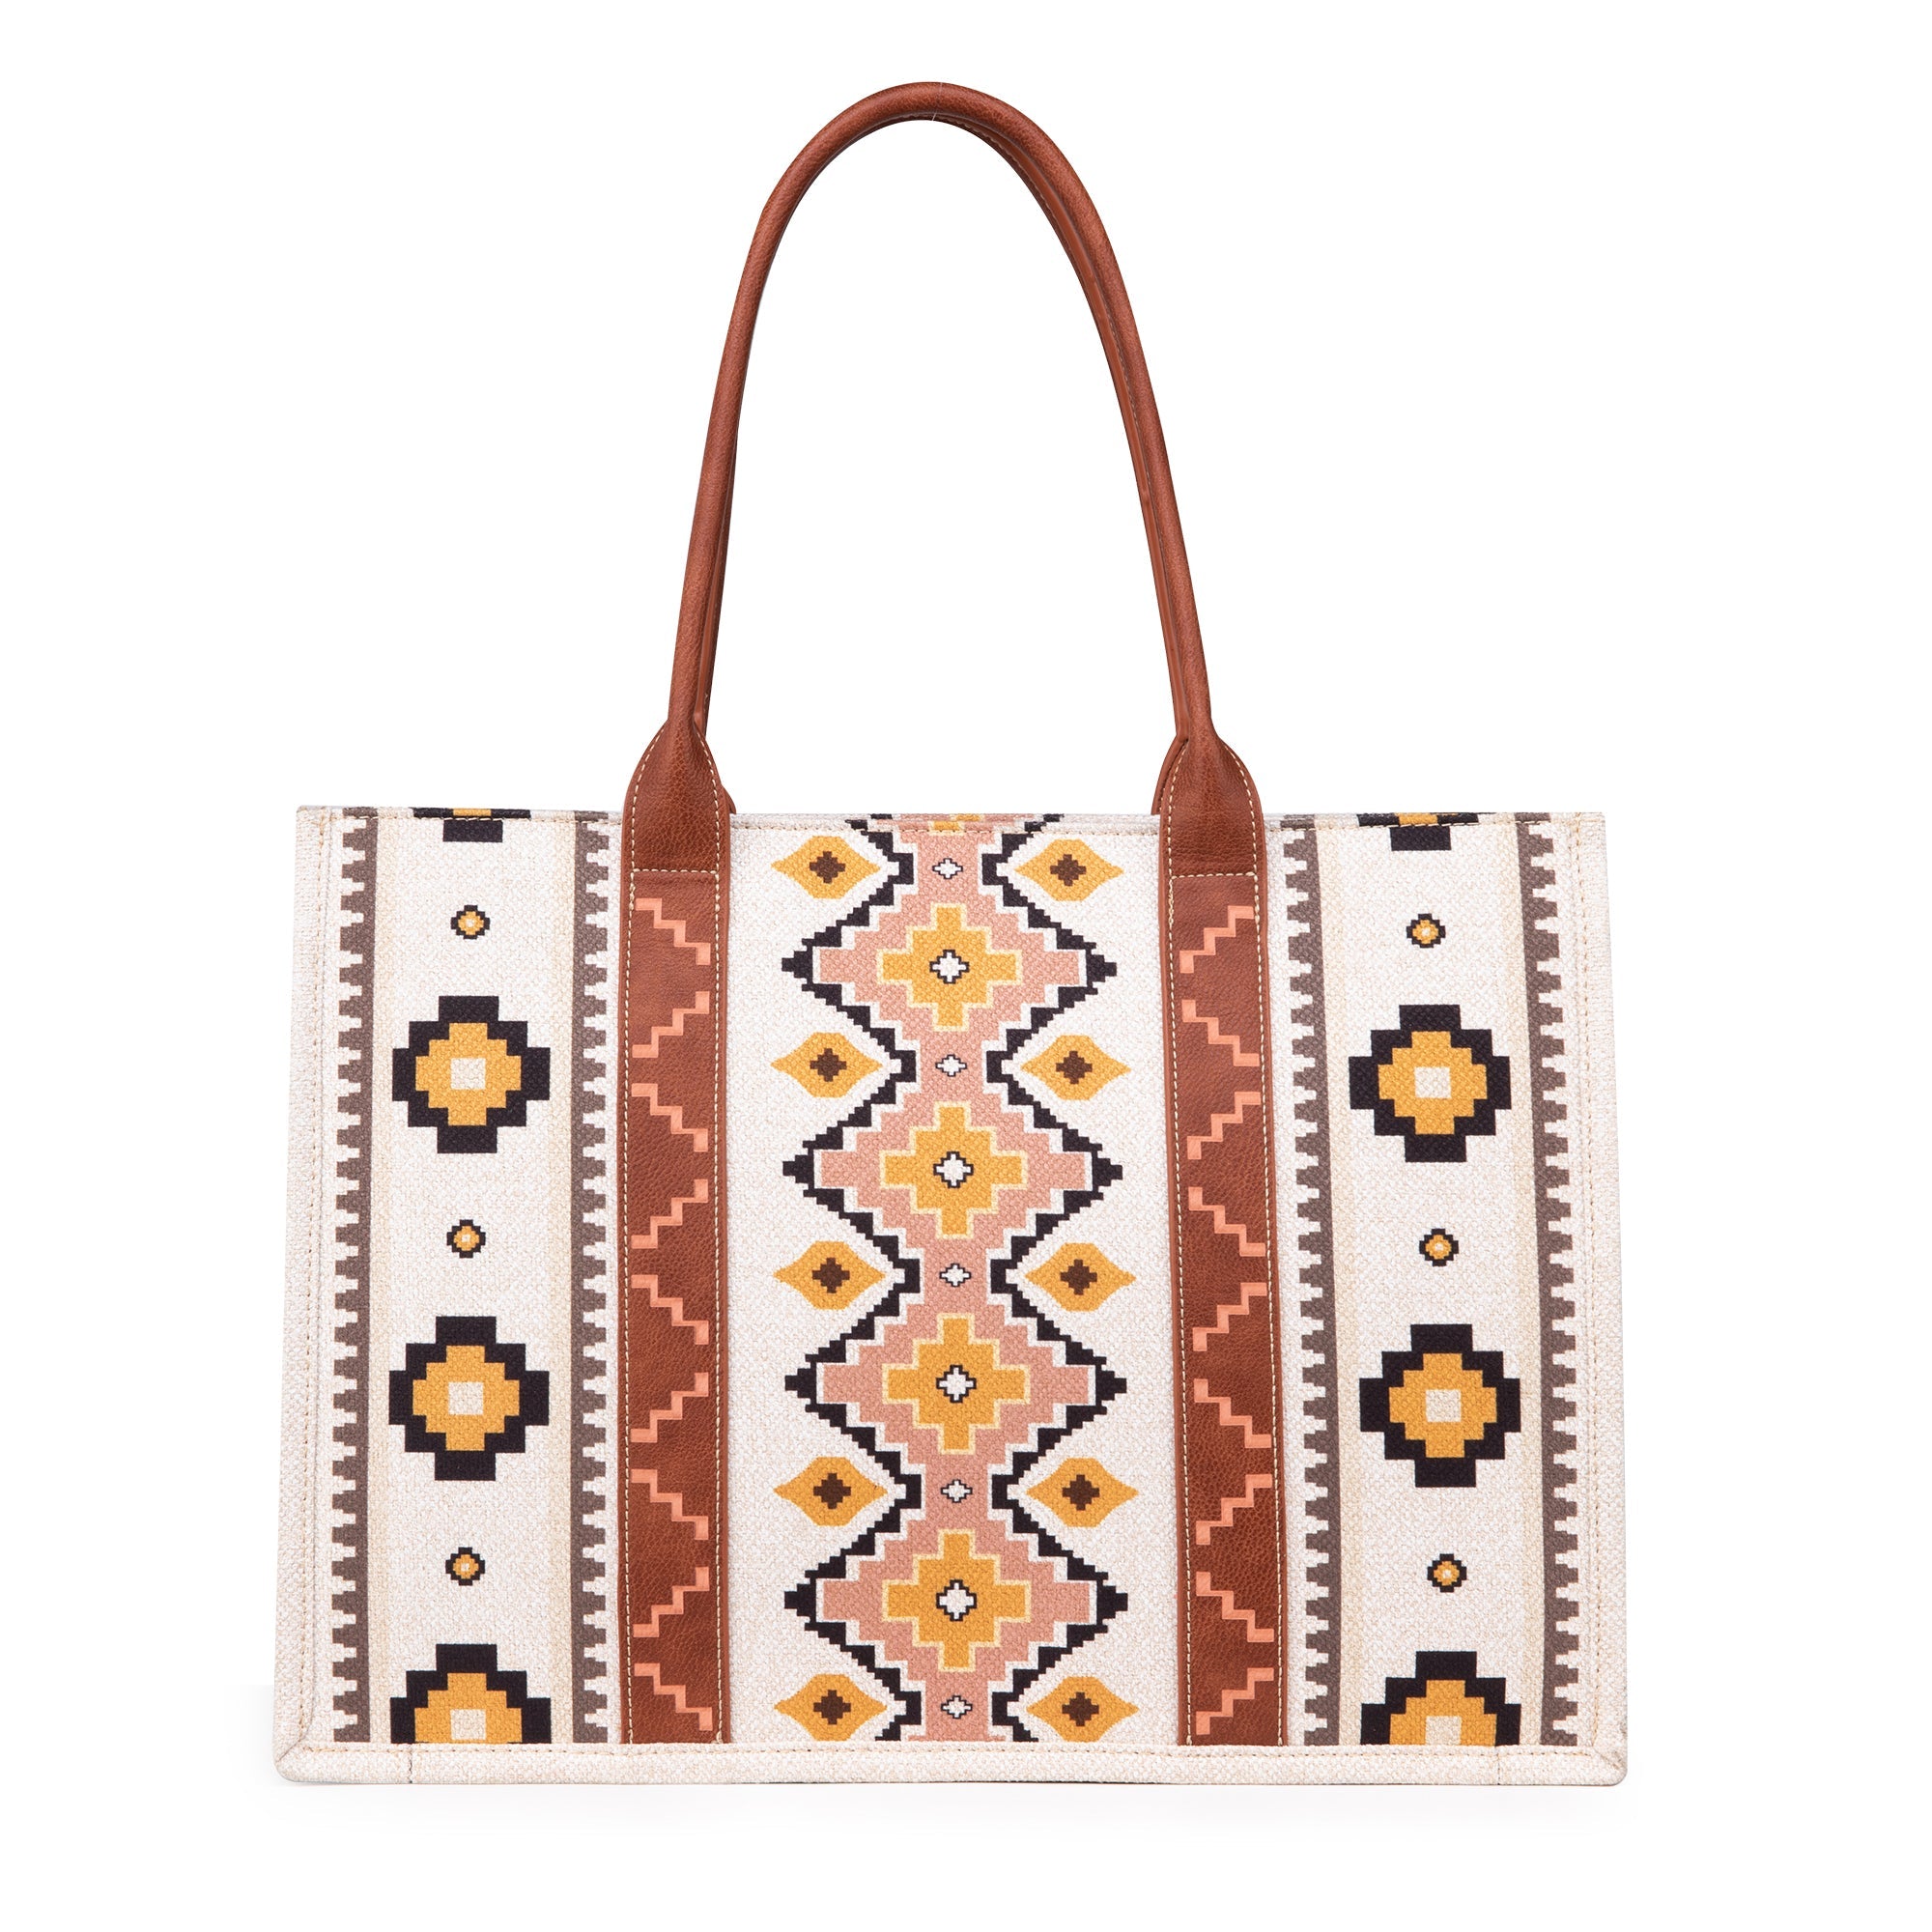 Wrangler Southwestern Dual Sided Print Canvas Tote/Crossbody Collection - Cowgirl Wear